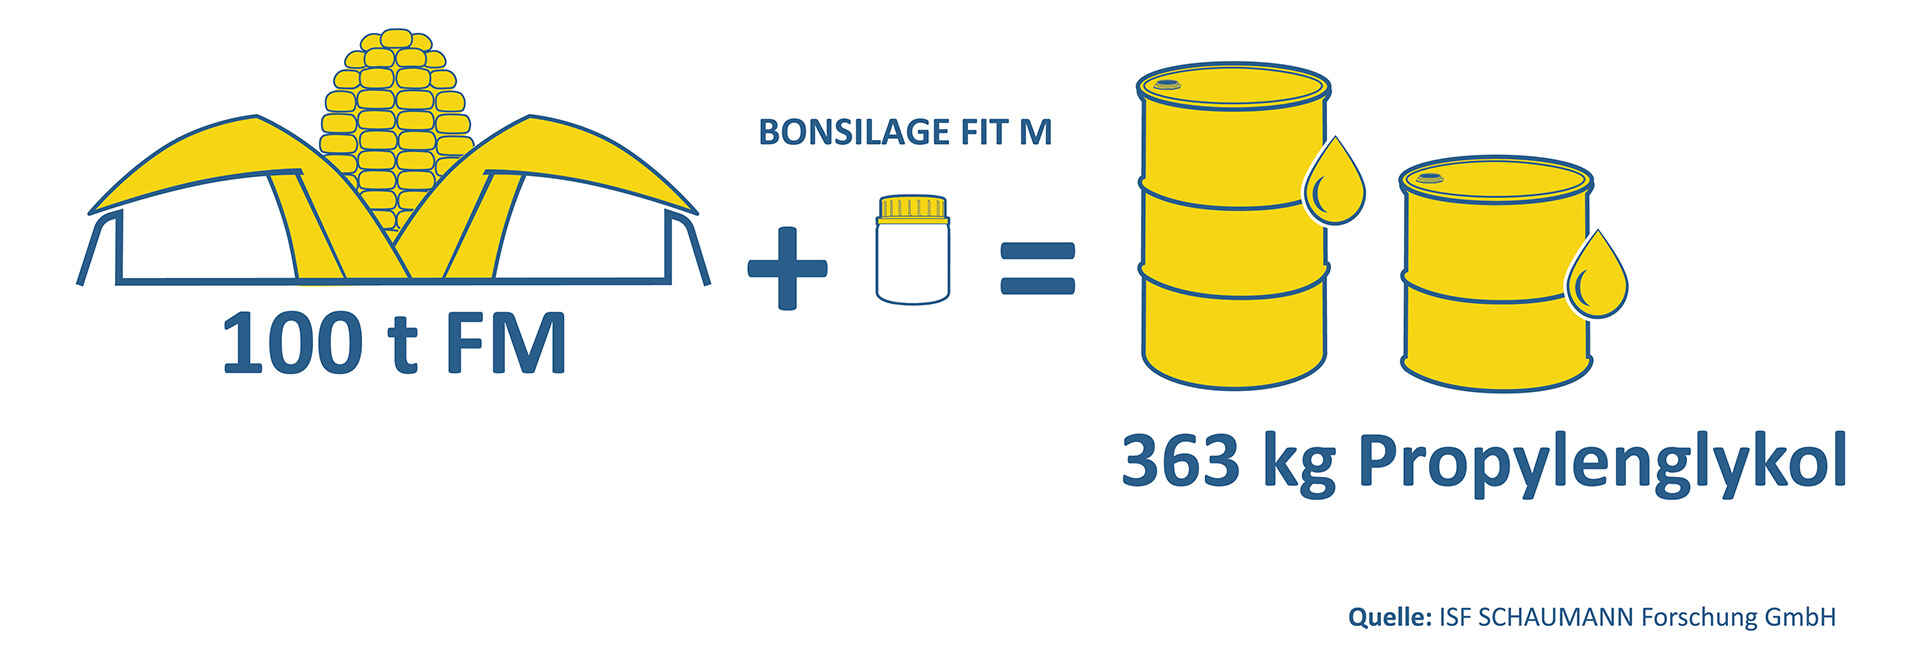 One can BONSILAGE FIT M produces 363 kg of propylene glycol